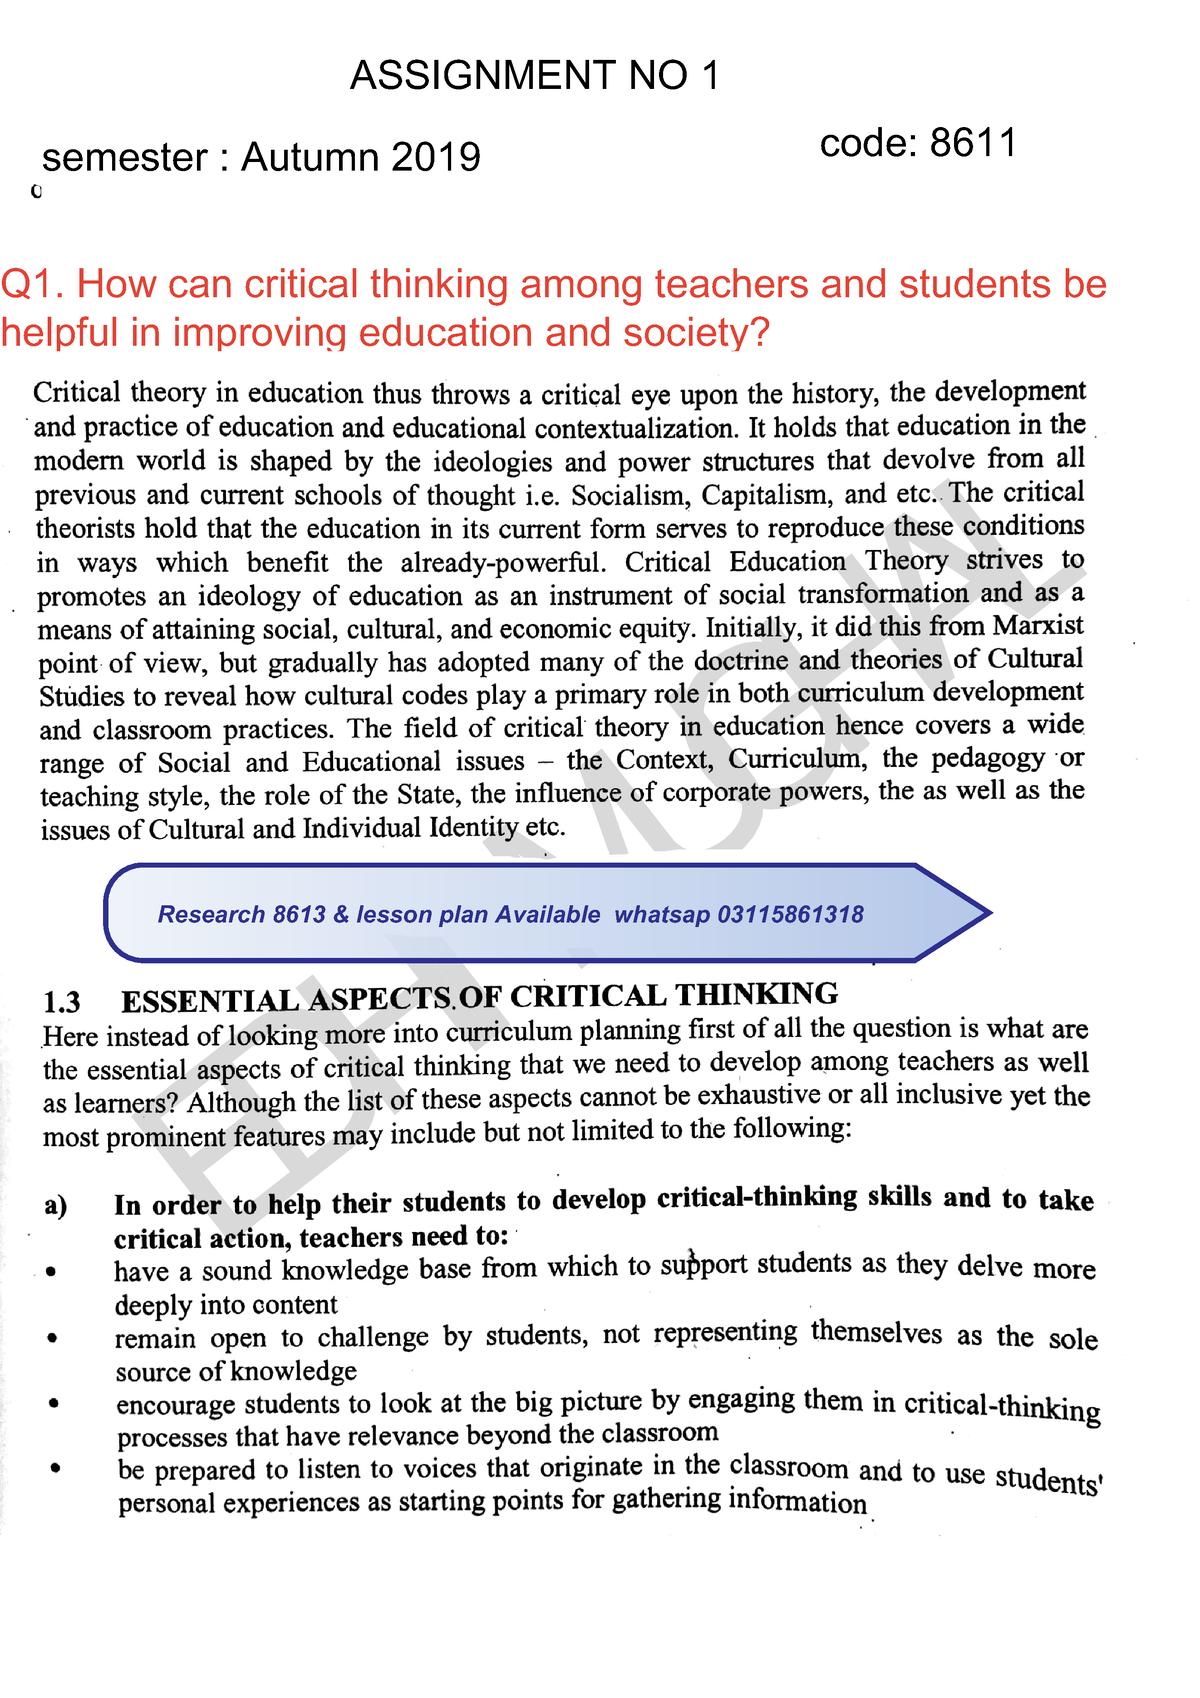 critical thinking and reflective practices(8611 solved assignment)